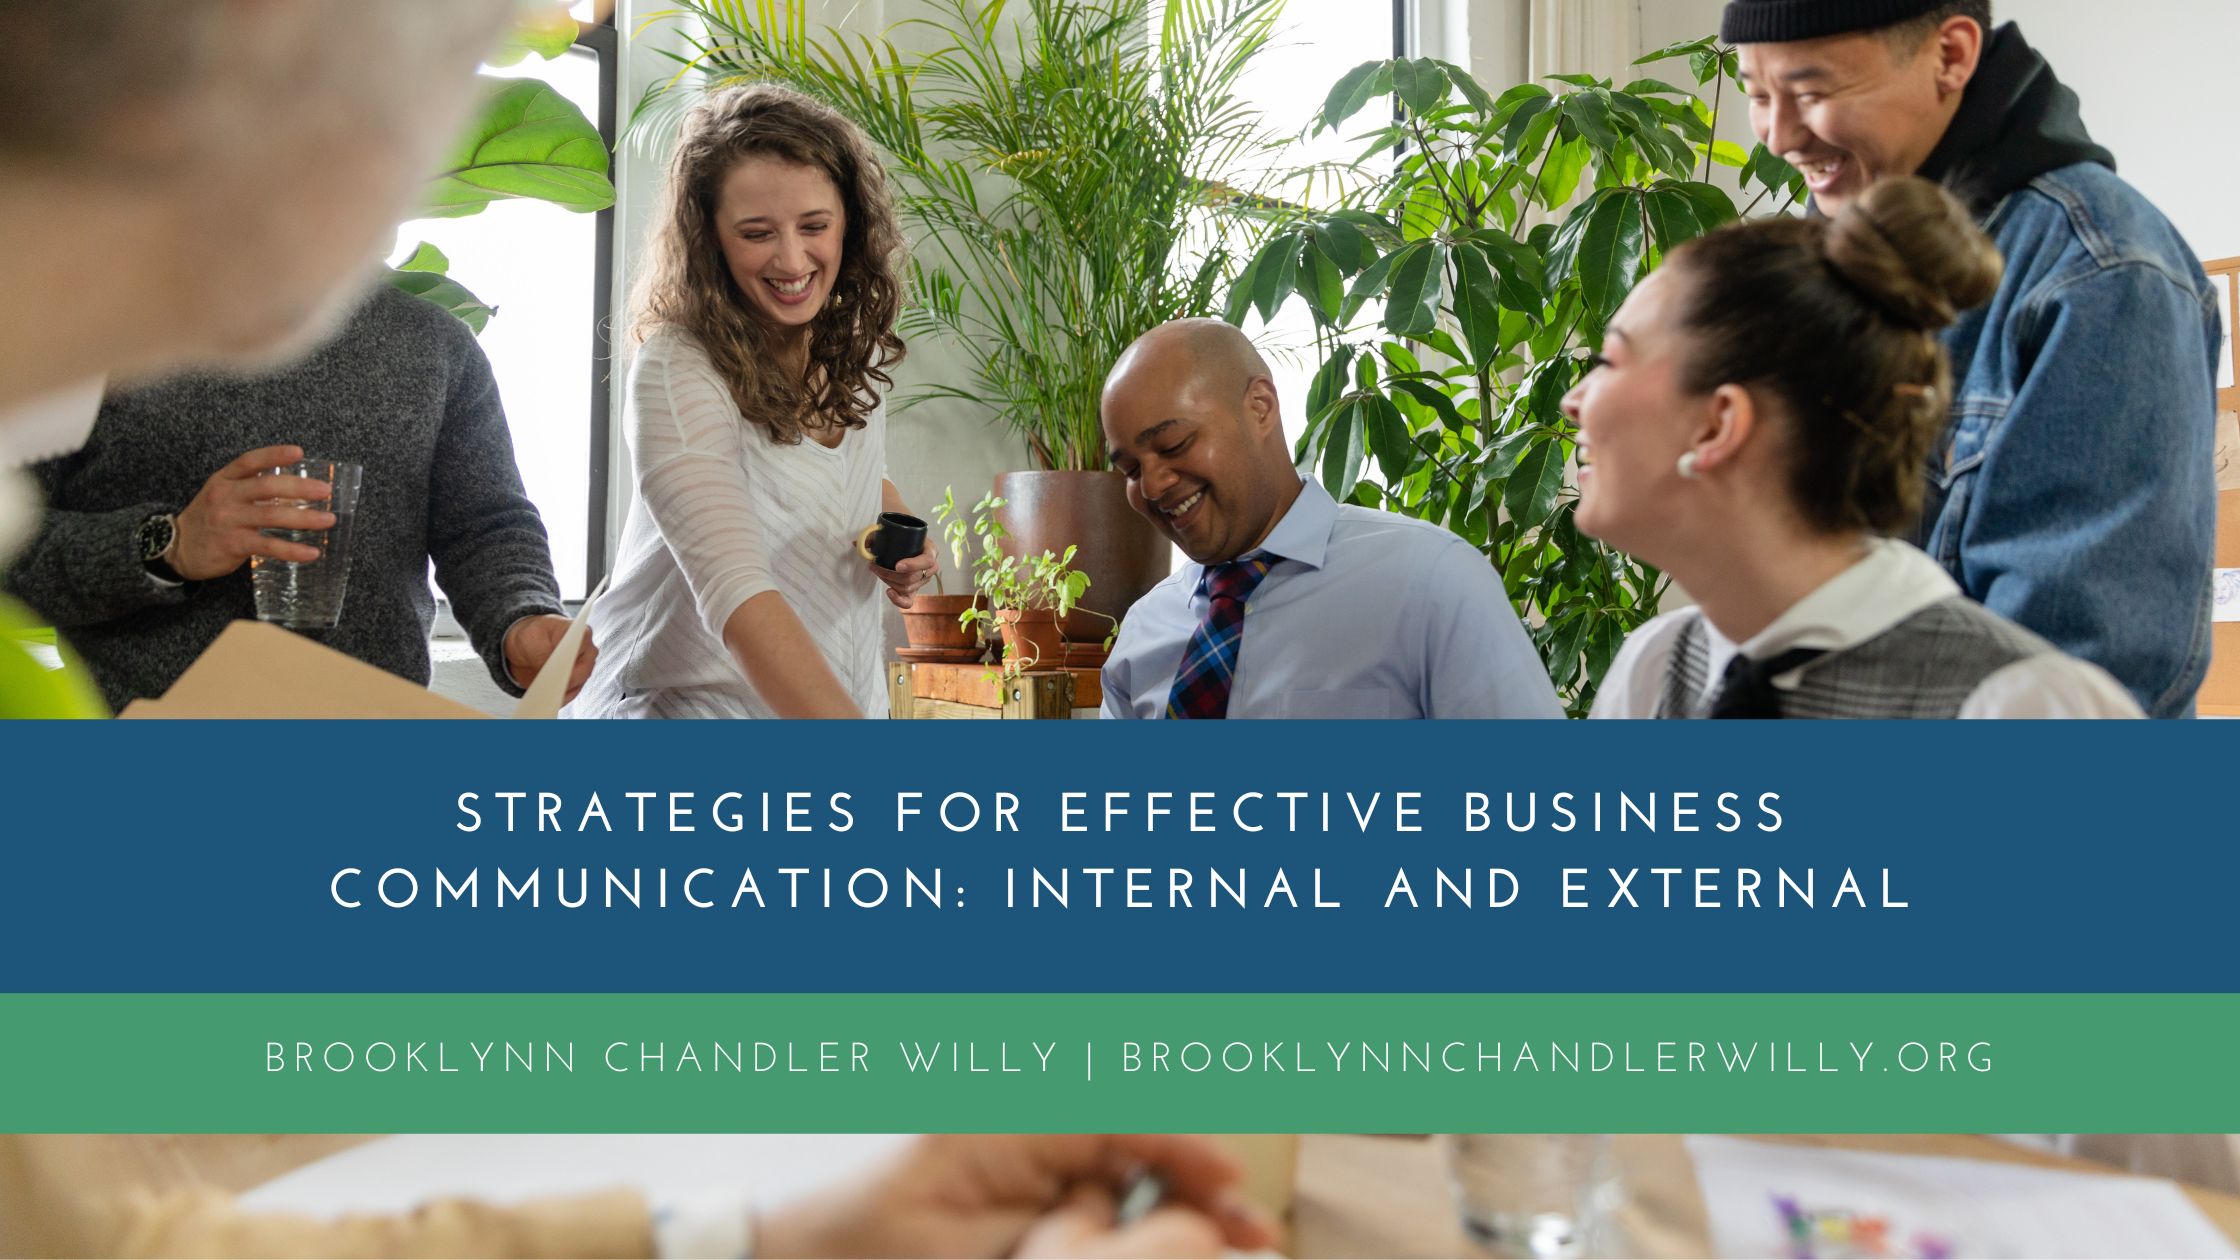 ny |
STRATEGIES FOR EFFECTIVE BUSINESS
COMMUNICATION: INTERNAL AND EXTERNAL

BROOKLYNN CHANDLER WILLY | BROOKLYNNCHANDLERWILLY. ORG

SEs Same
nl La